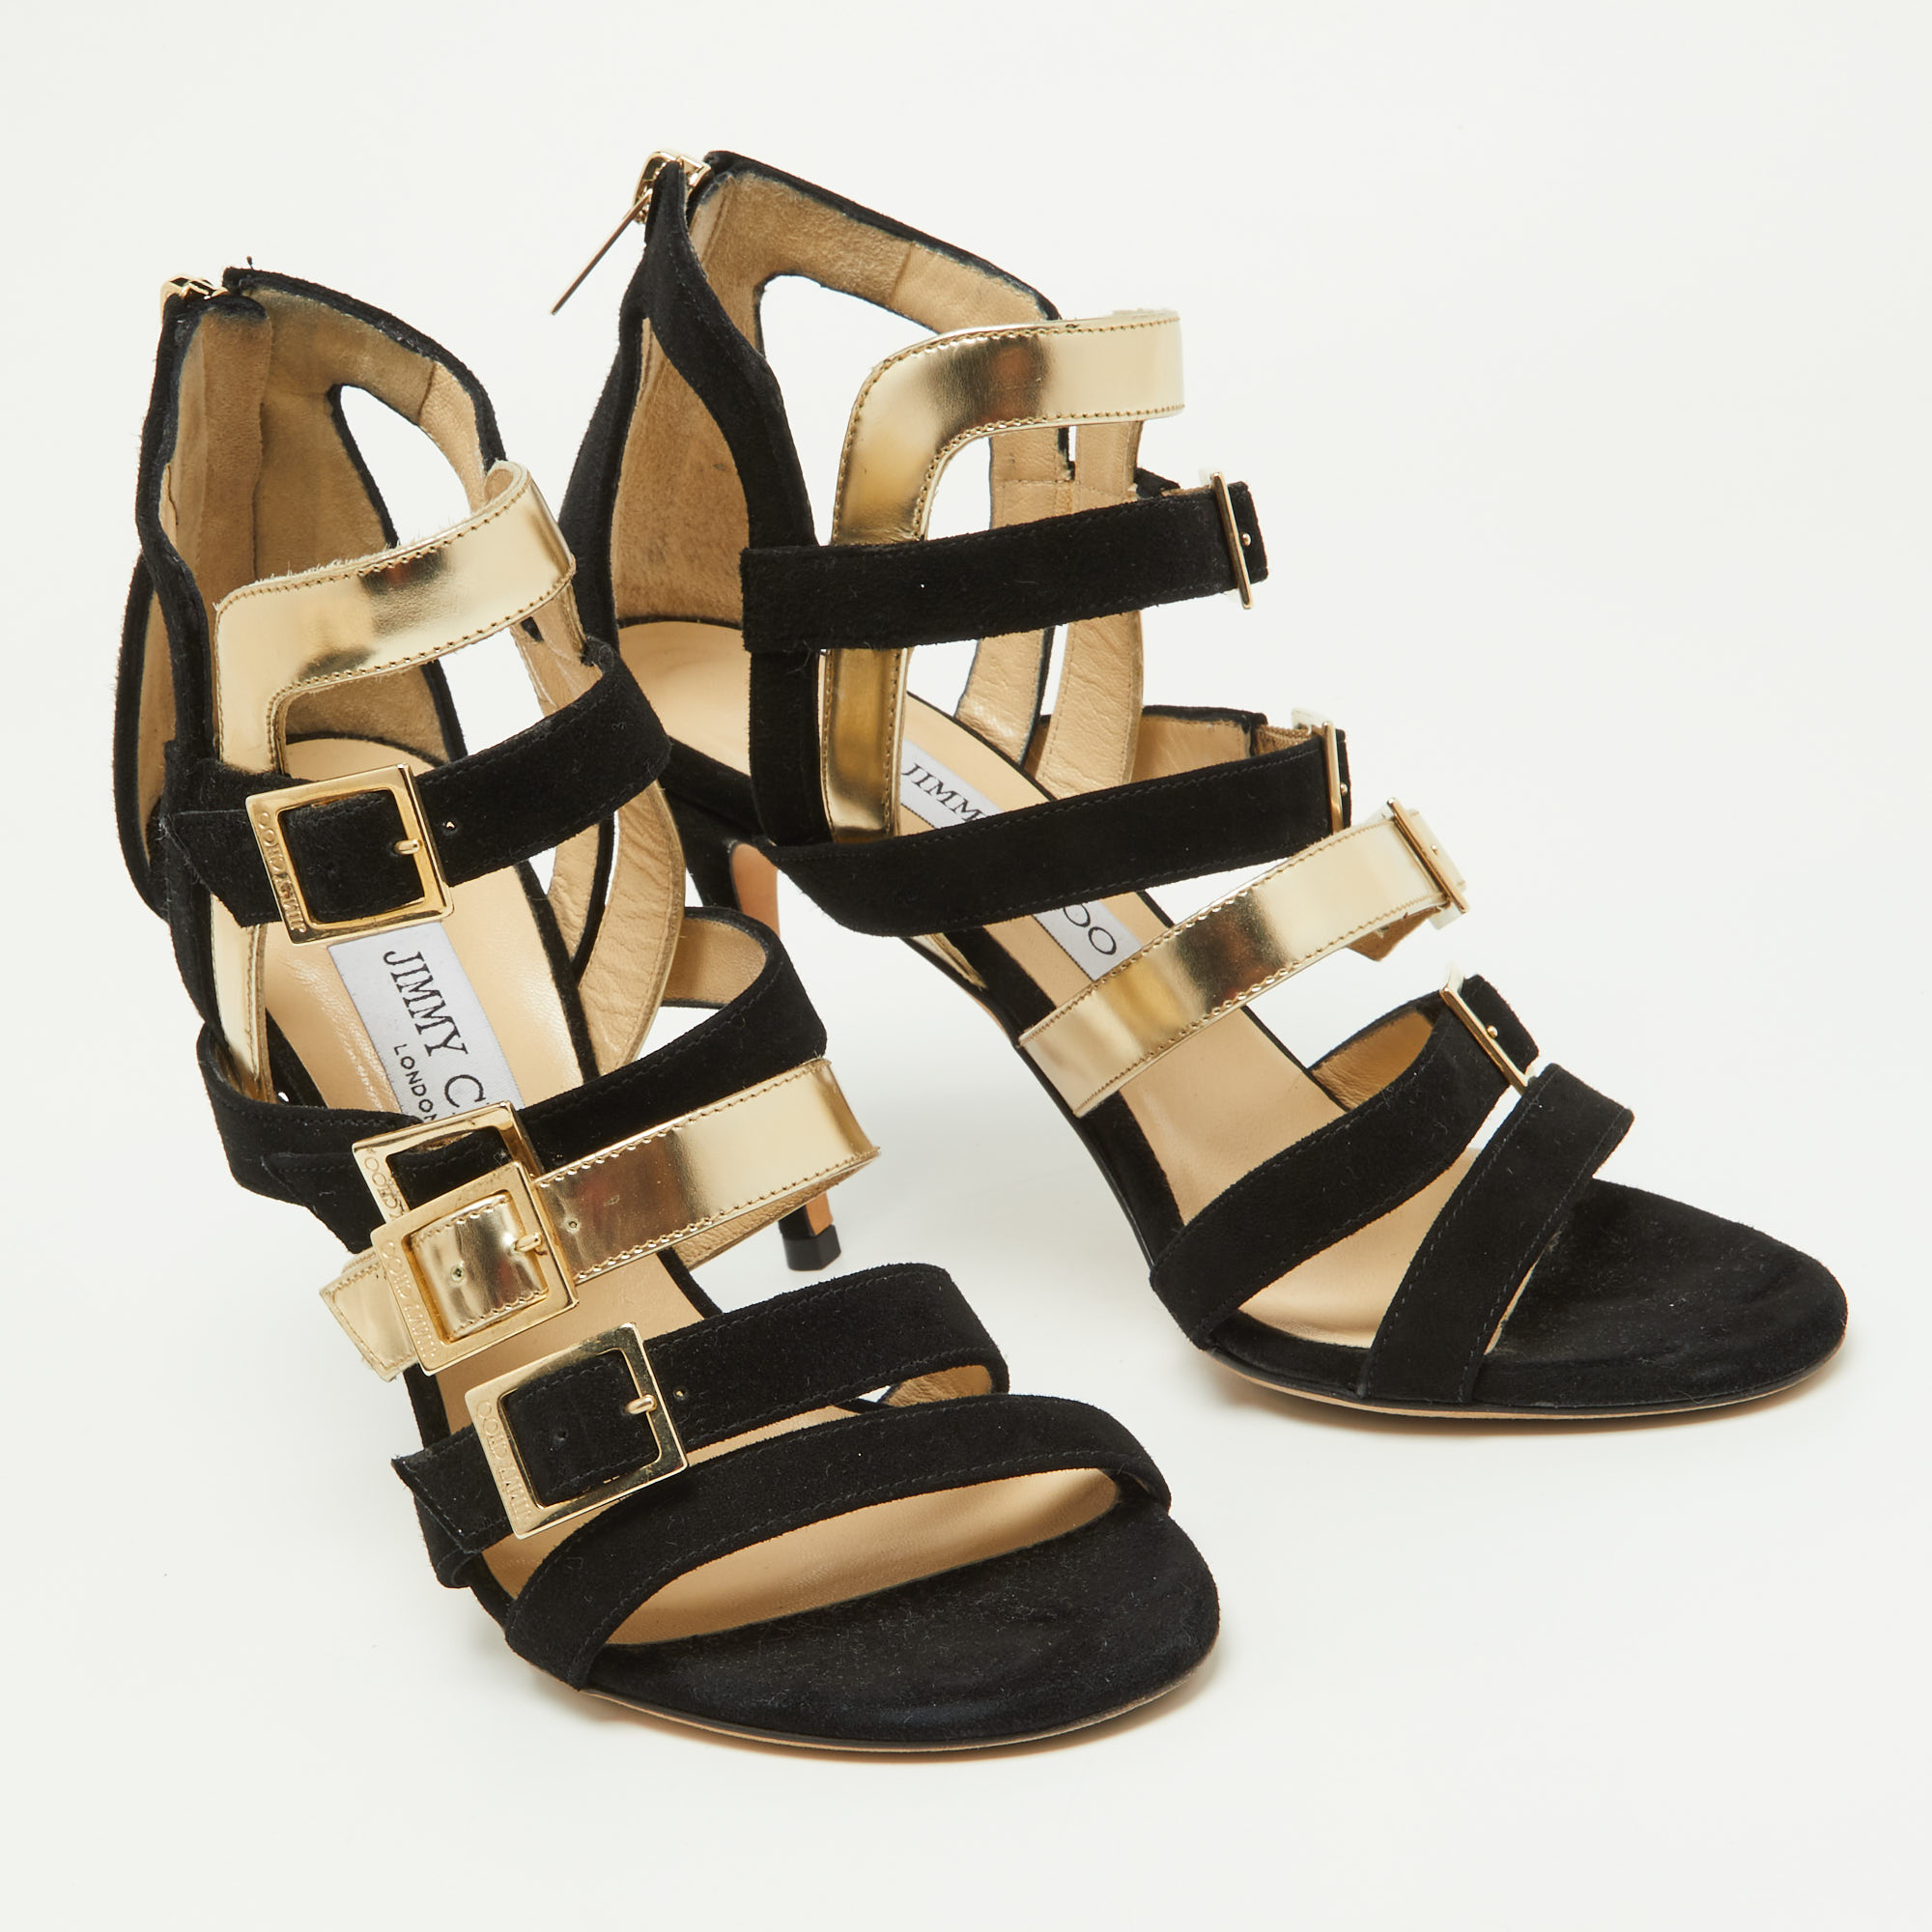 Jimmy Choo Black/Gold Suede And Patent Leather Booster Gladiator Sandals Size 38.5